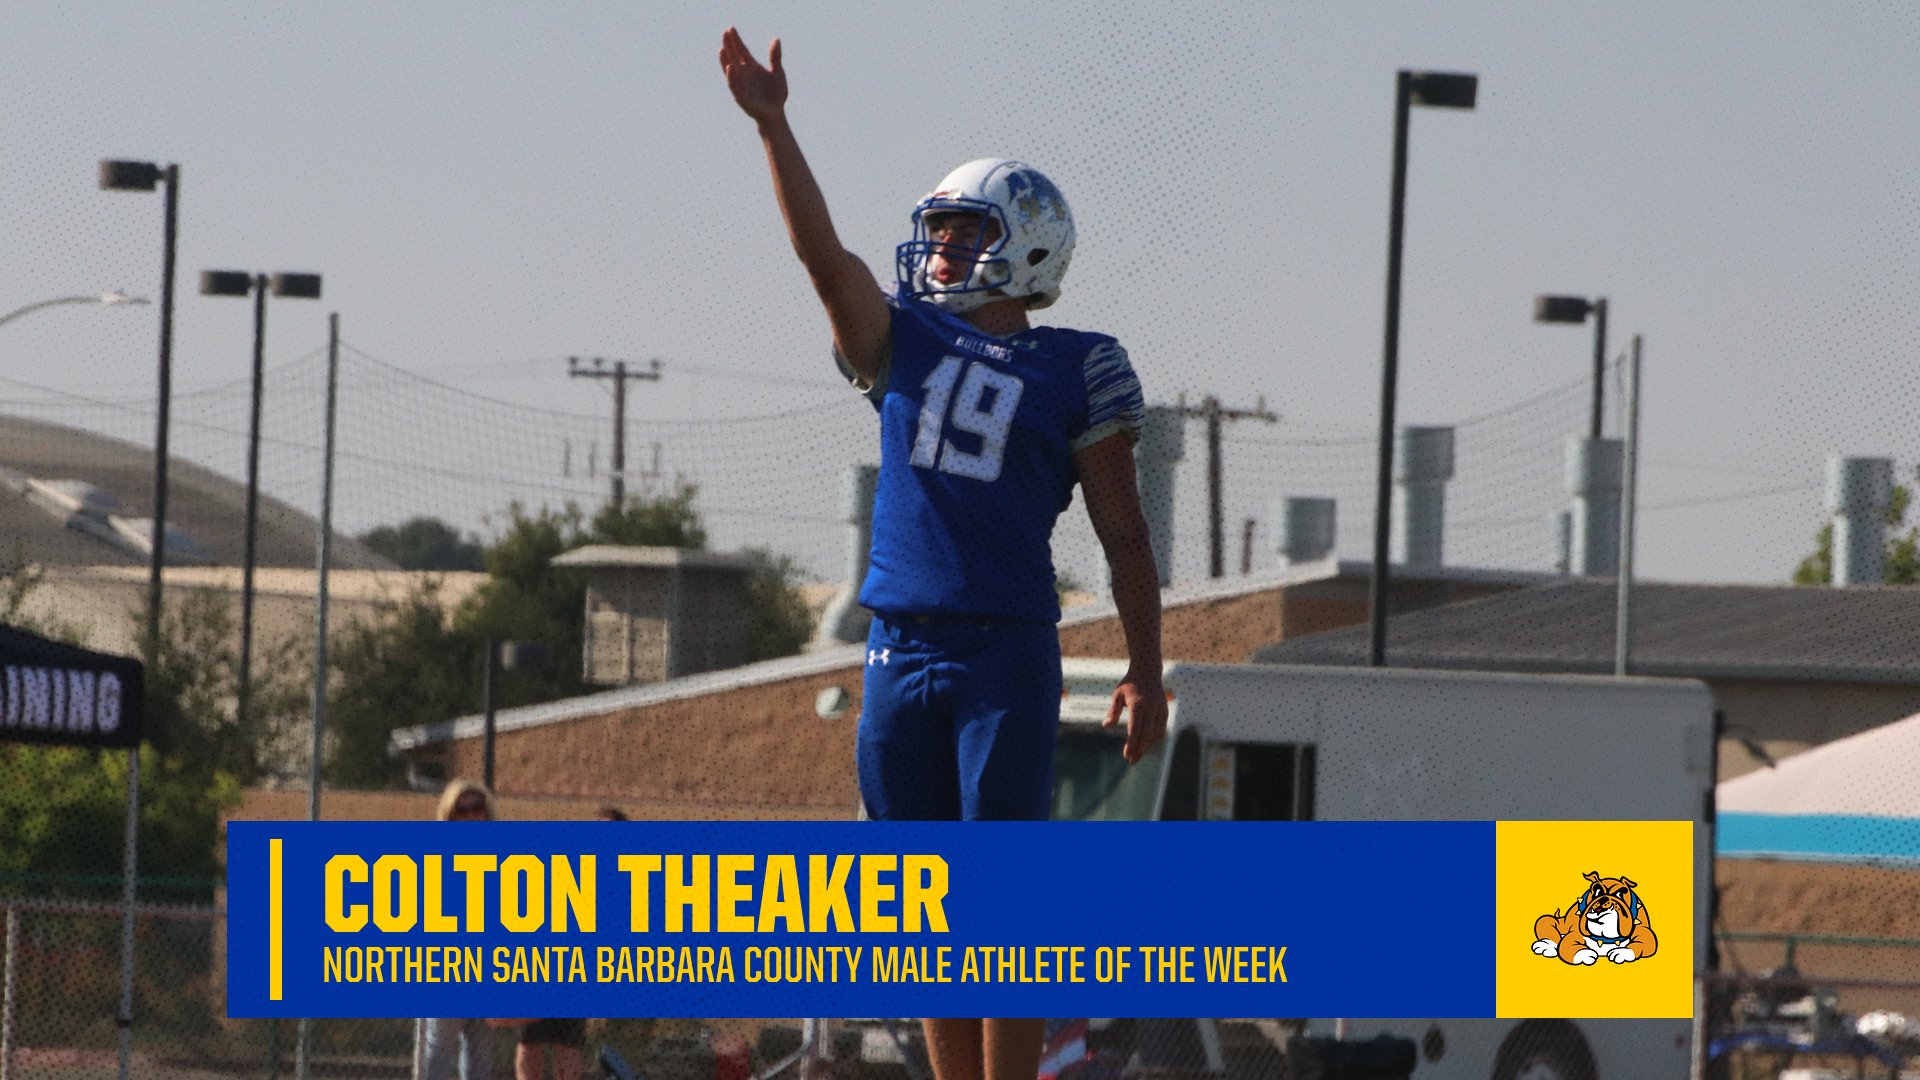 Colton Theaker Named as Northern Santa Barbara County Male Athlete of the Week